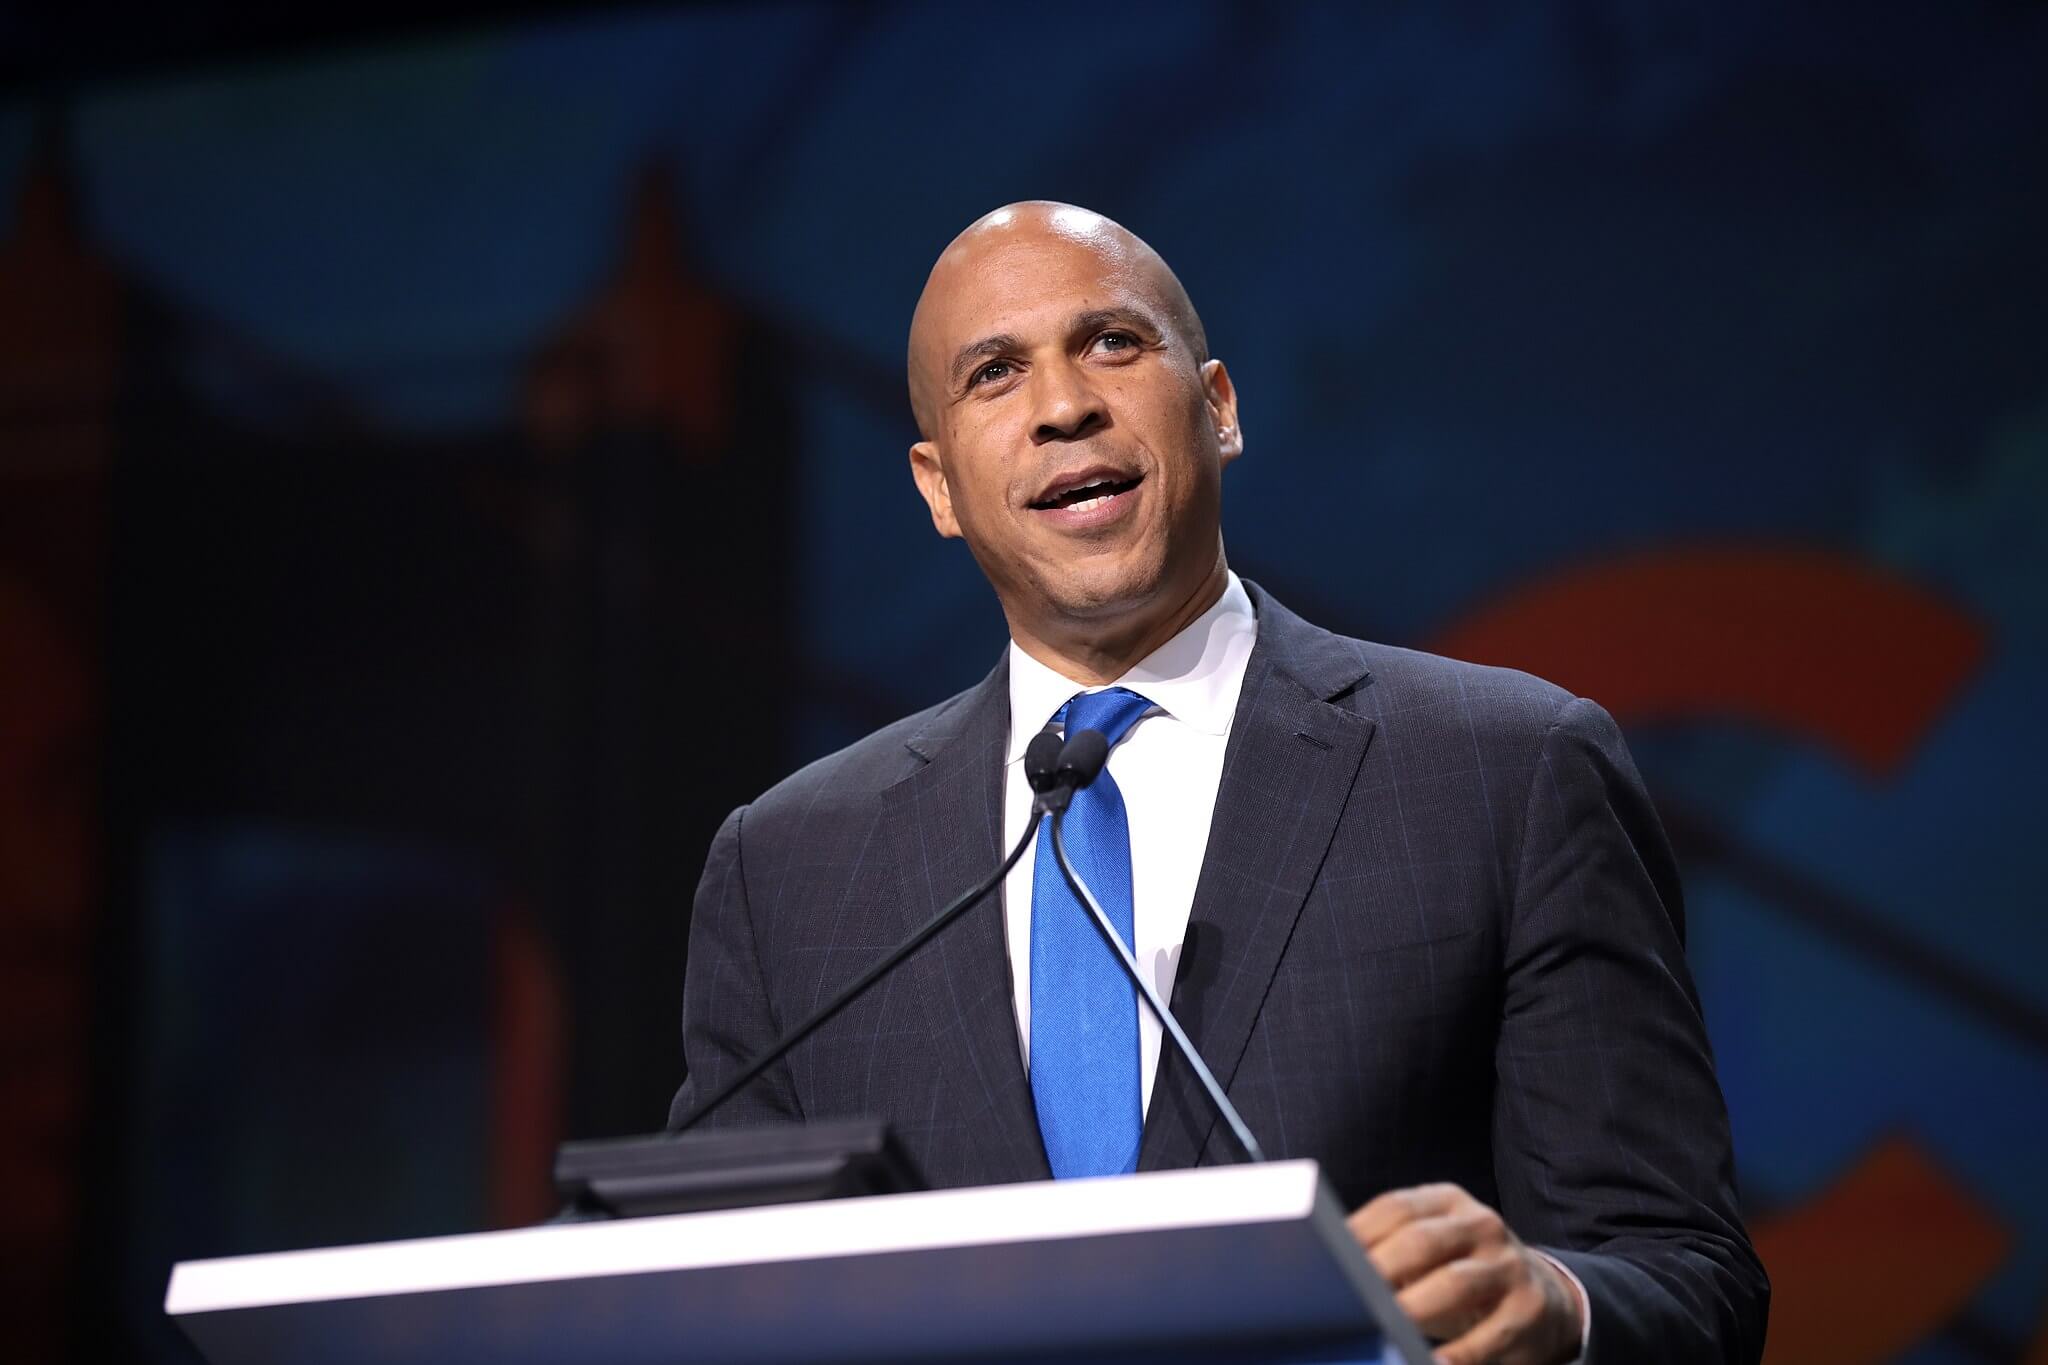 Cory Booker Will Speak With Students